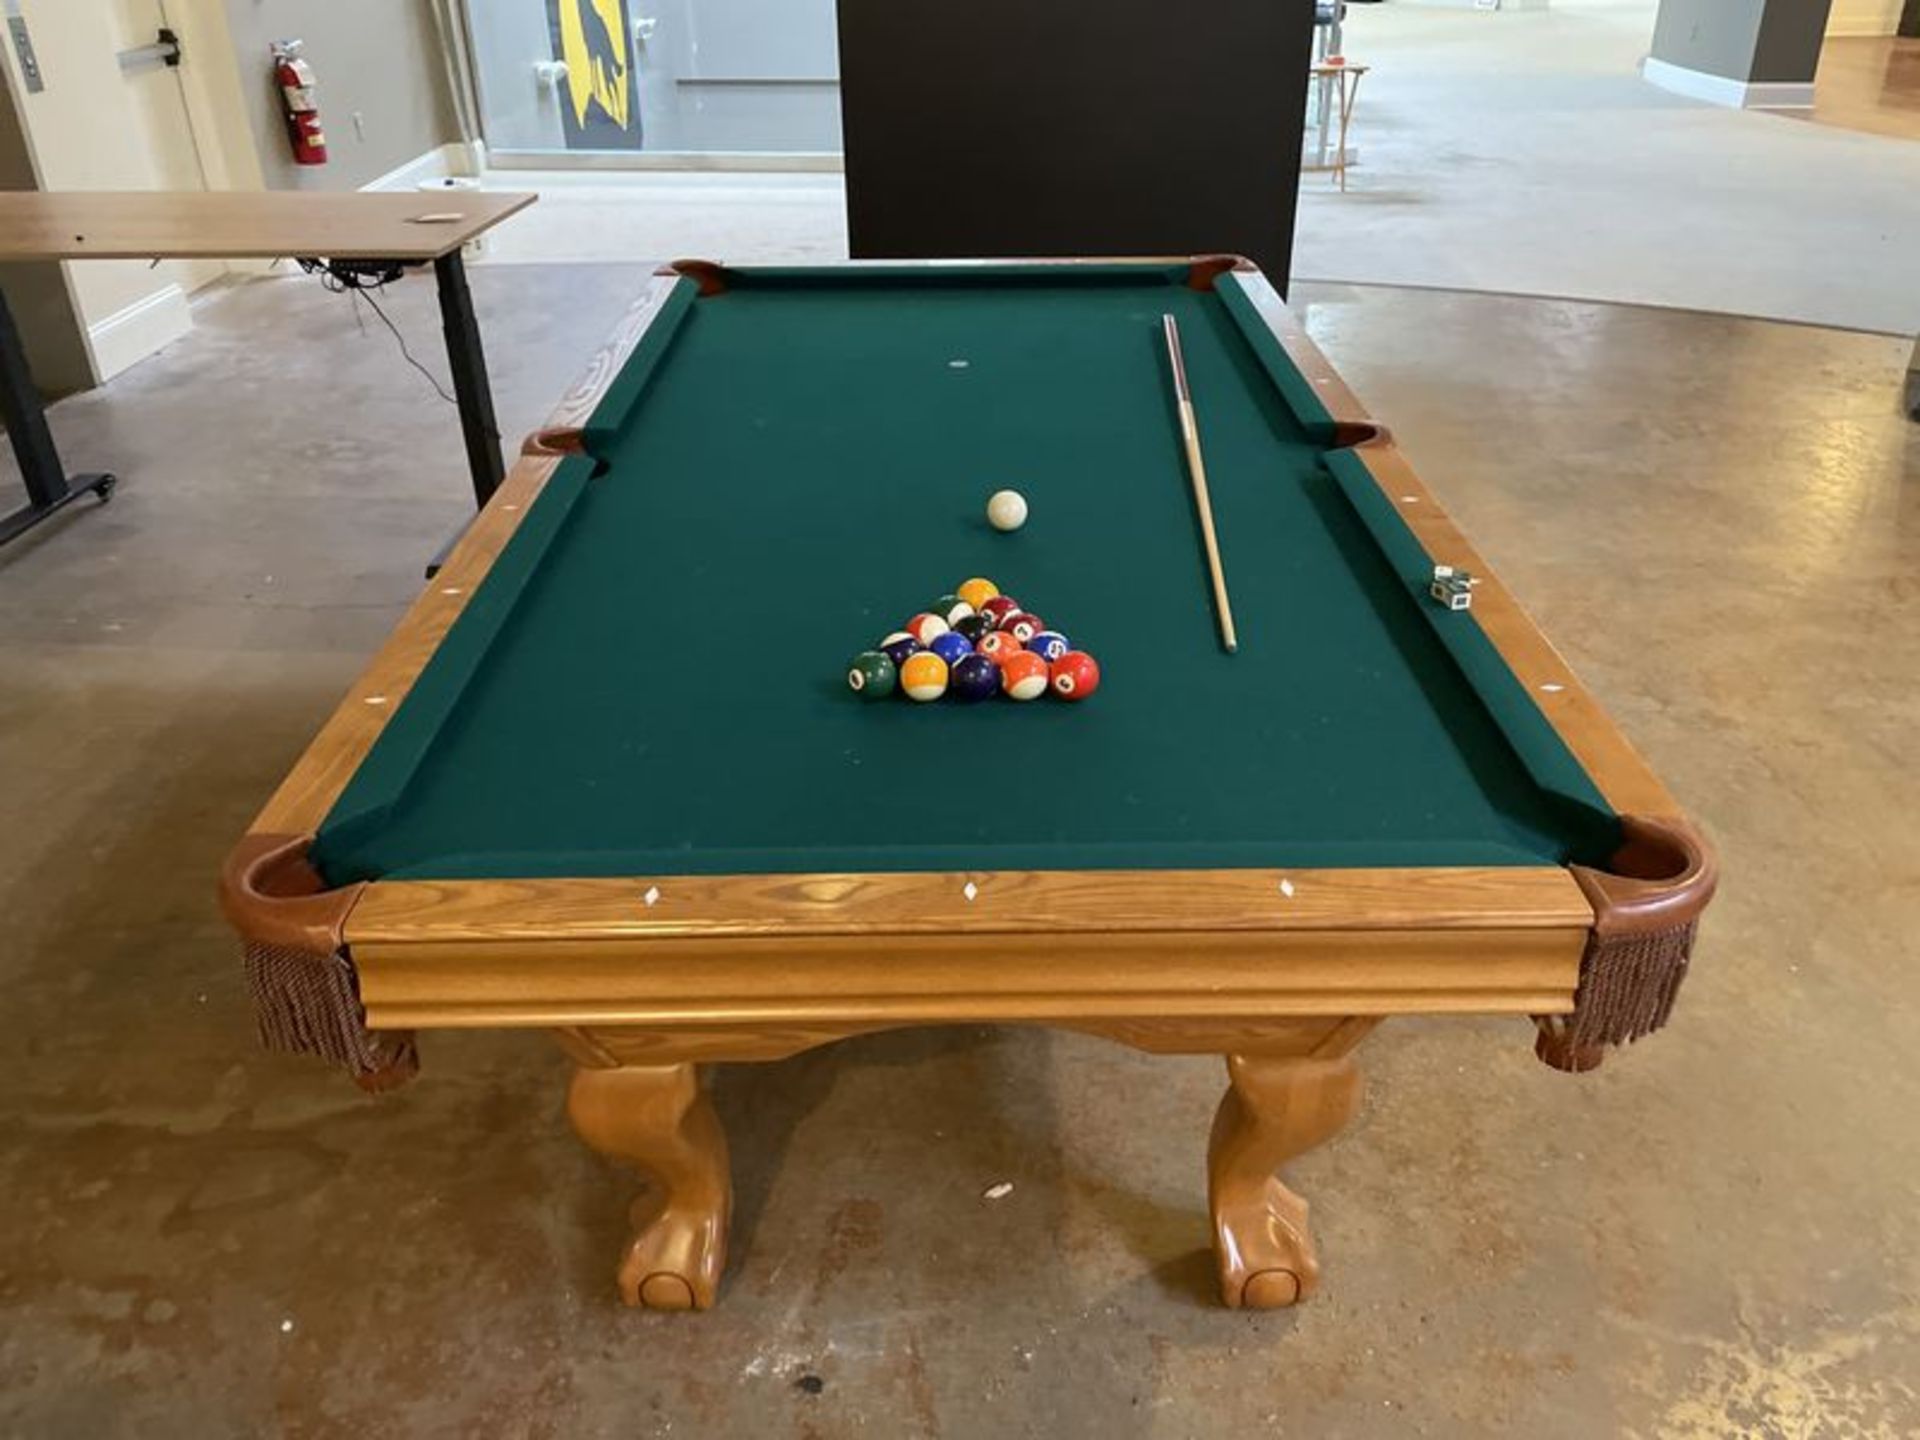 Contender by Brunswick Pool Table approx. 8' w/ Balls, Sticks, and Rack - Image 3 of 5